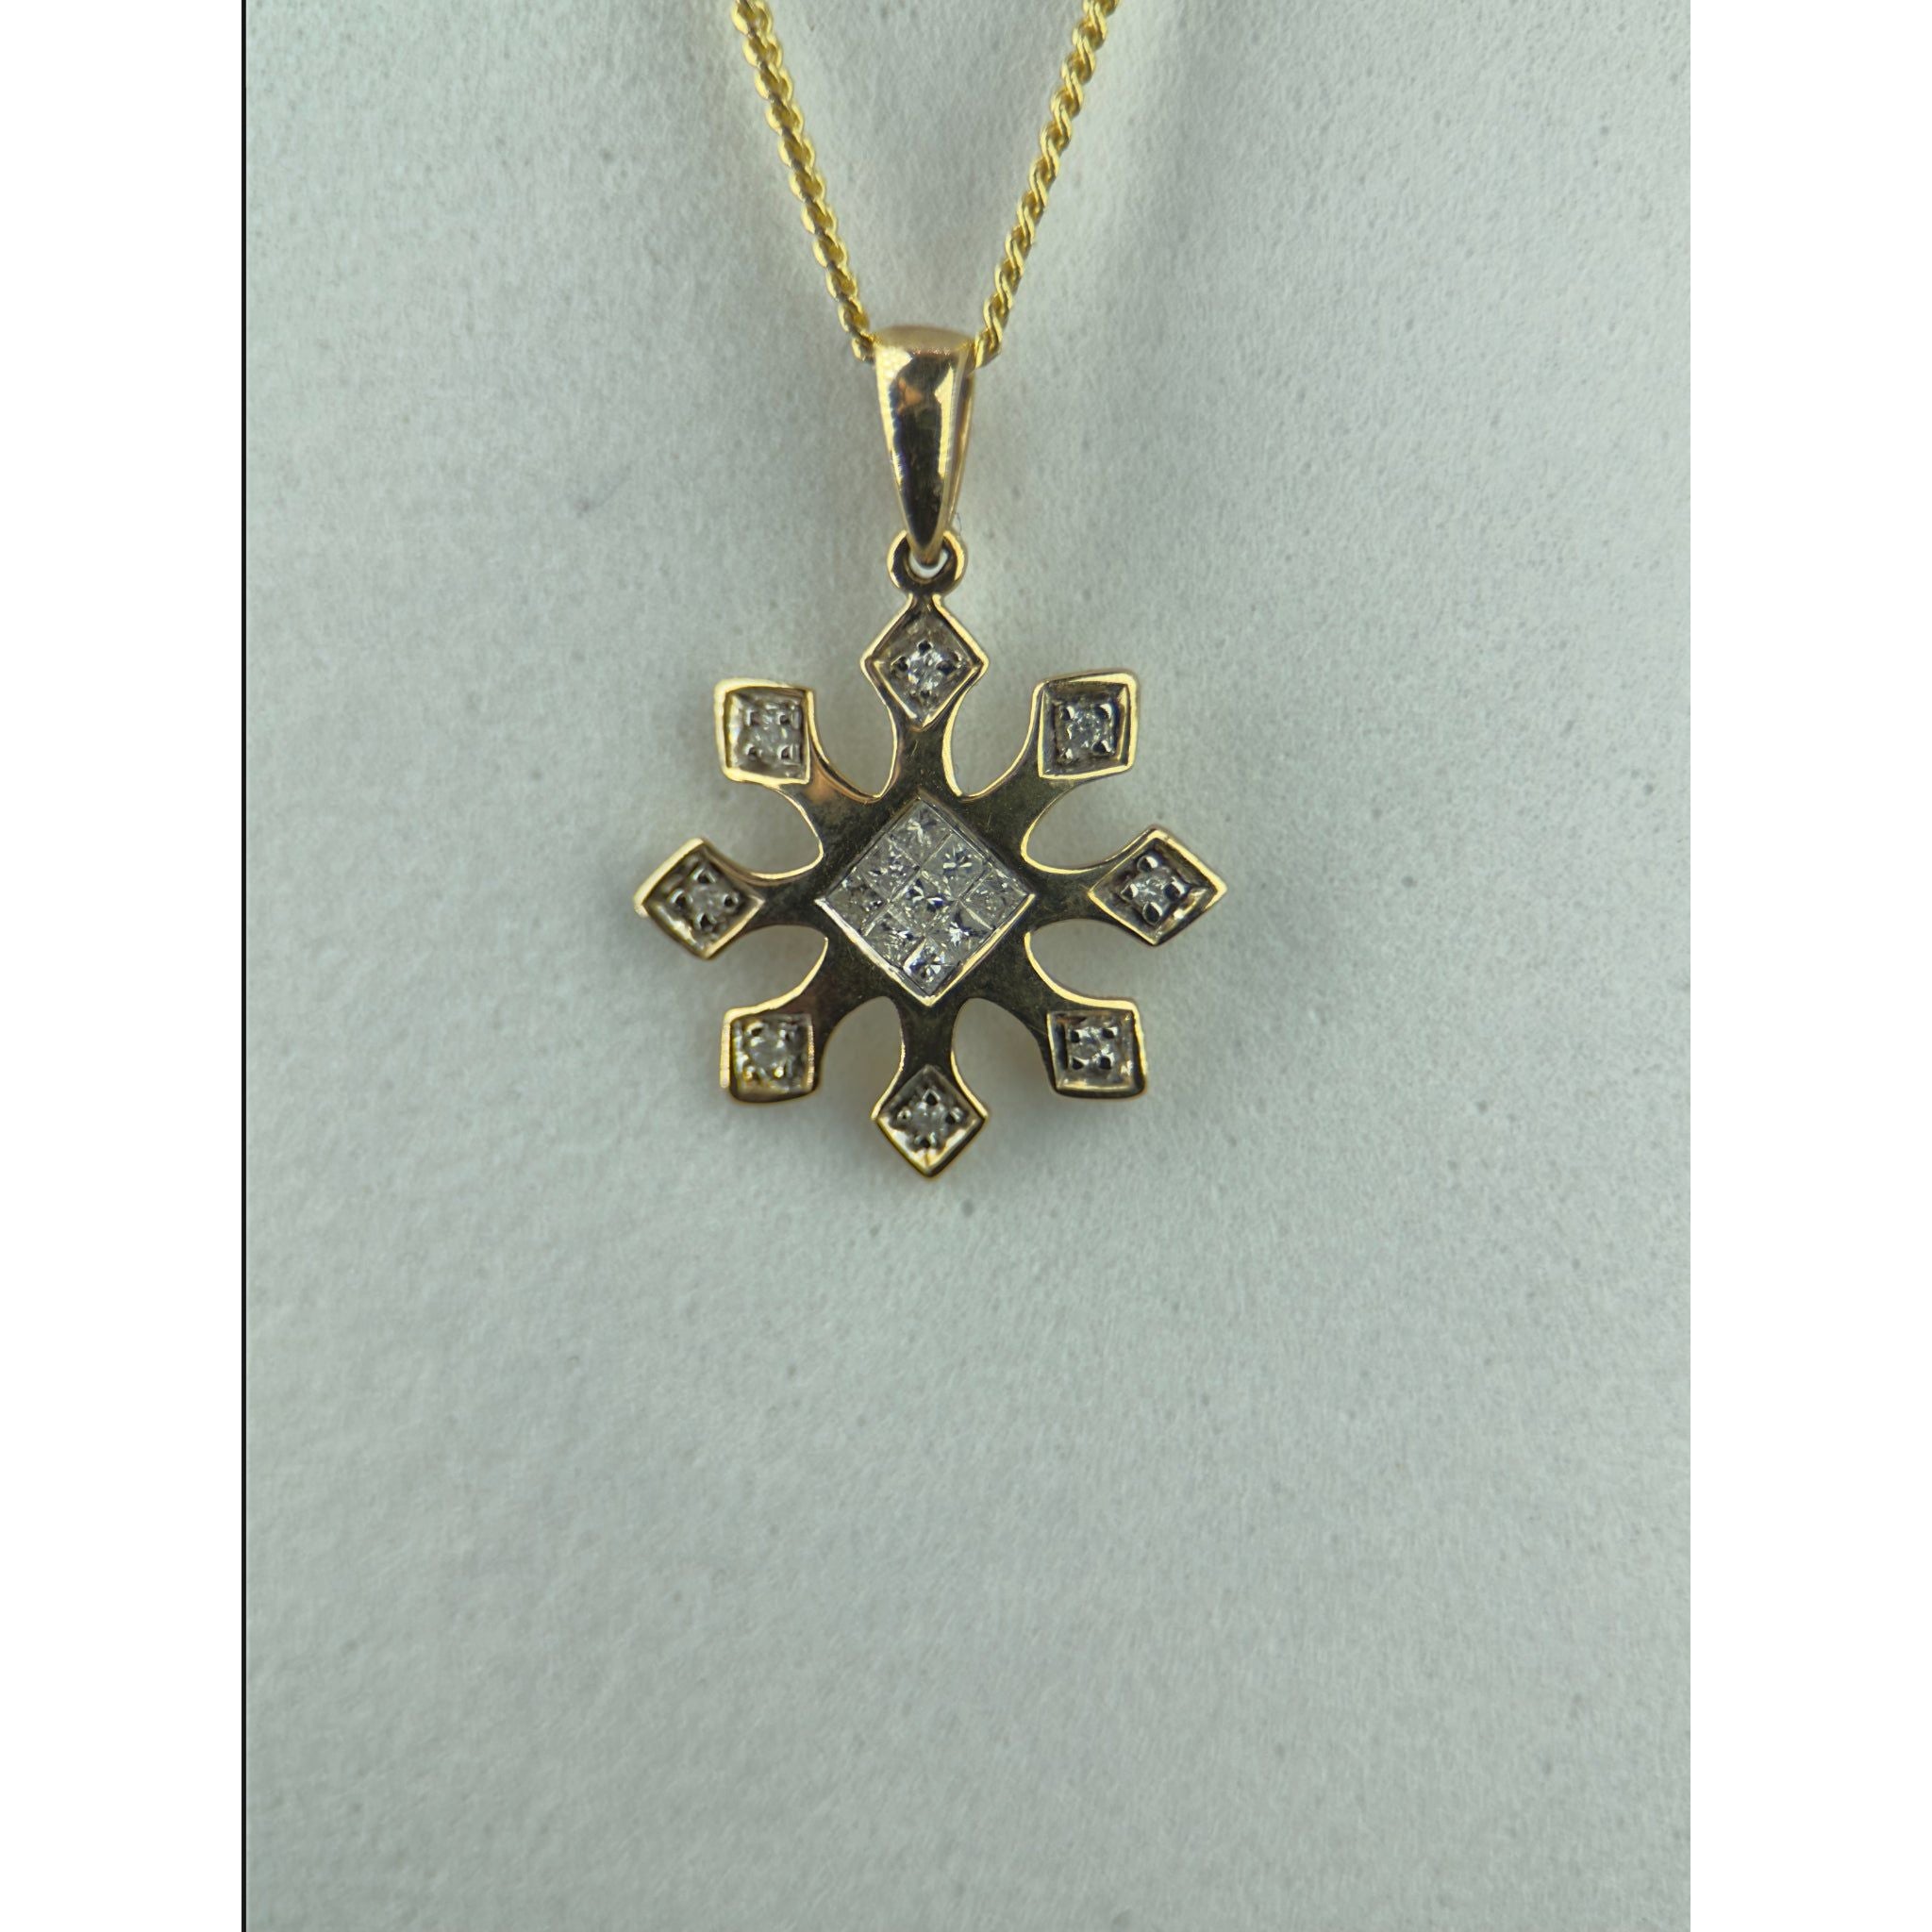 DR2211 - 14K Yellow Gold - Diamond - Pendant and Chain